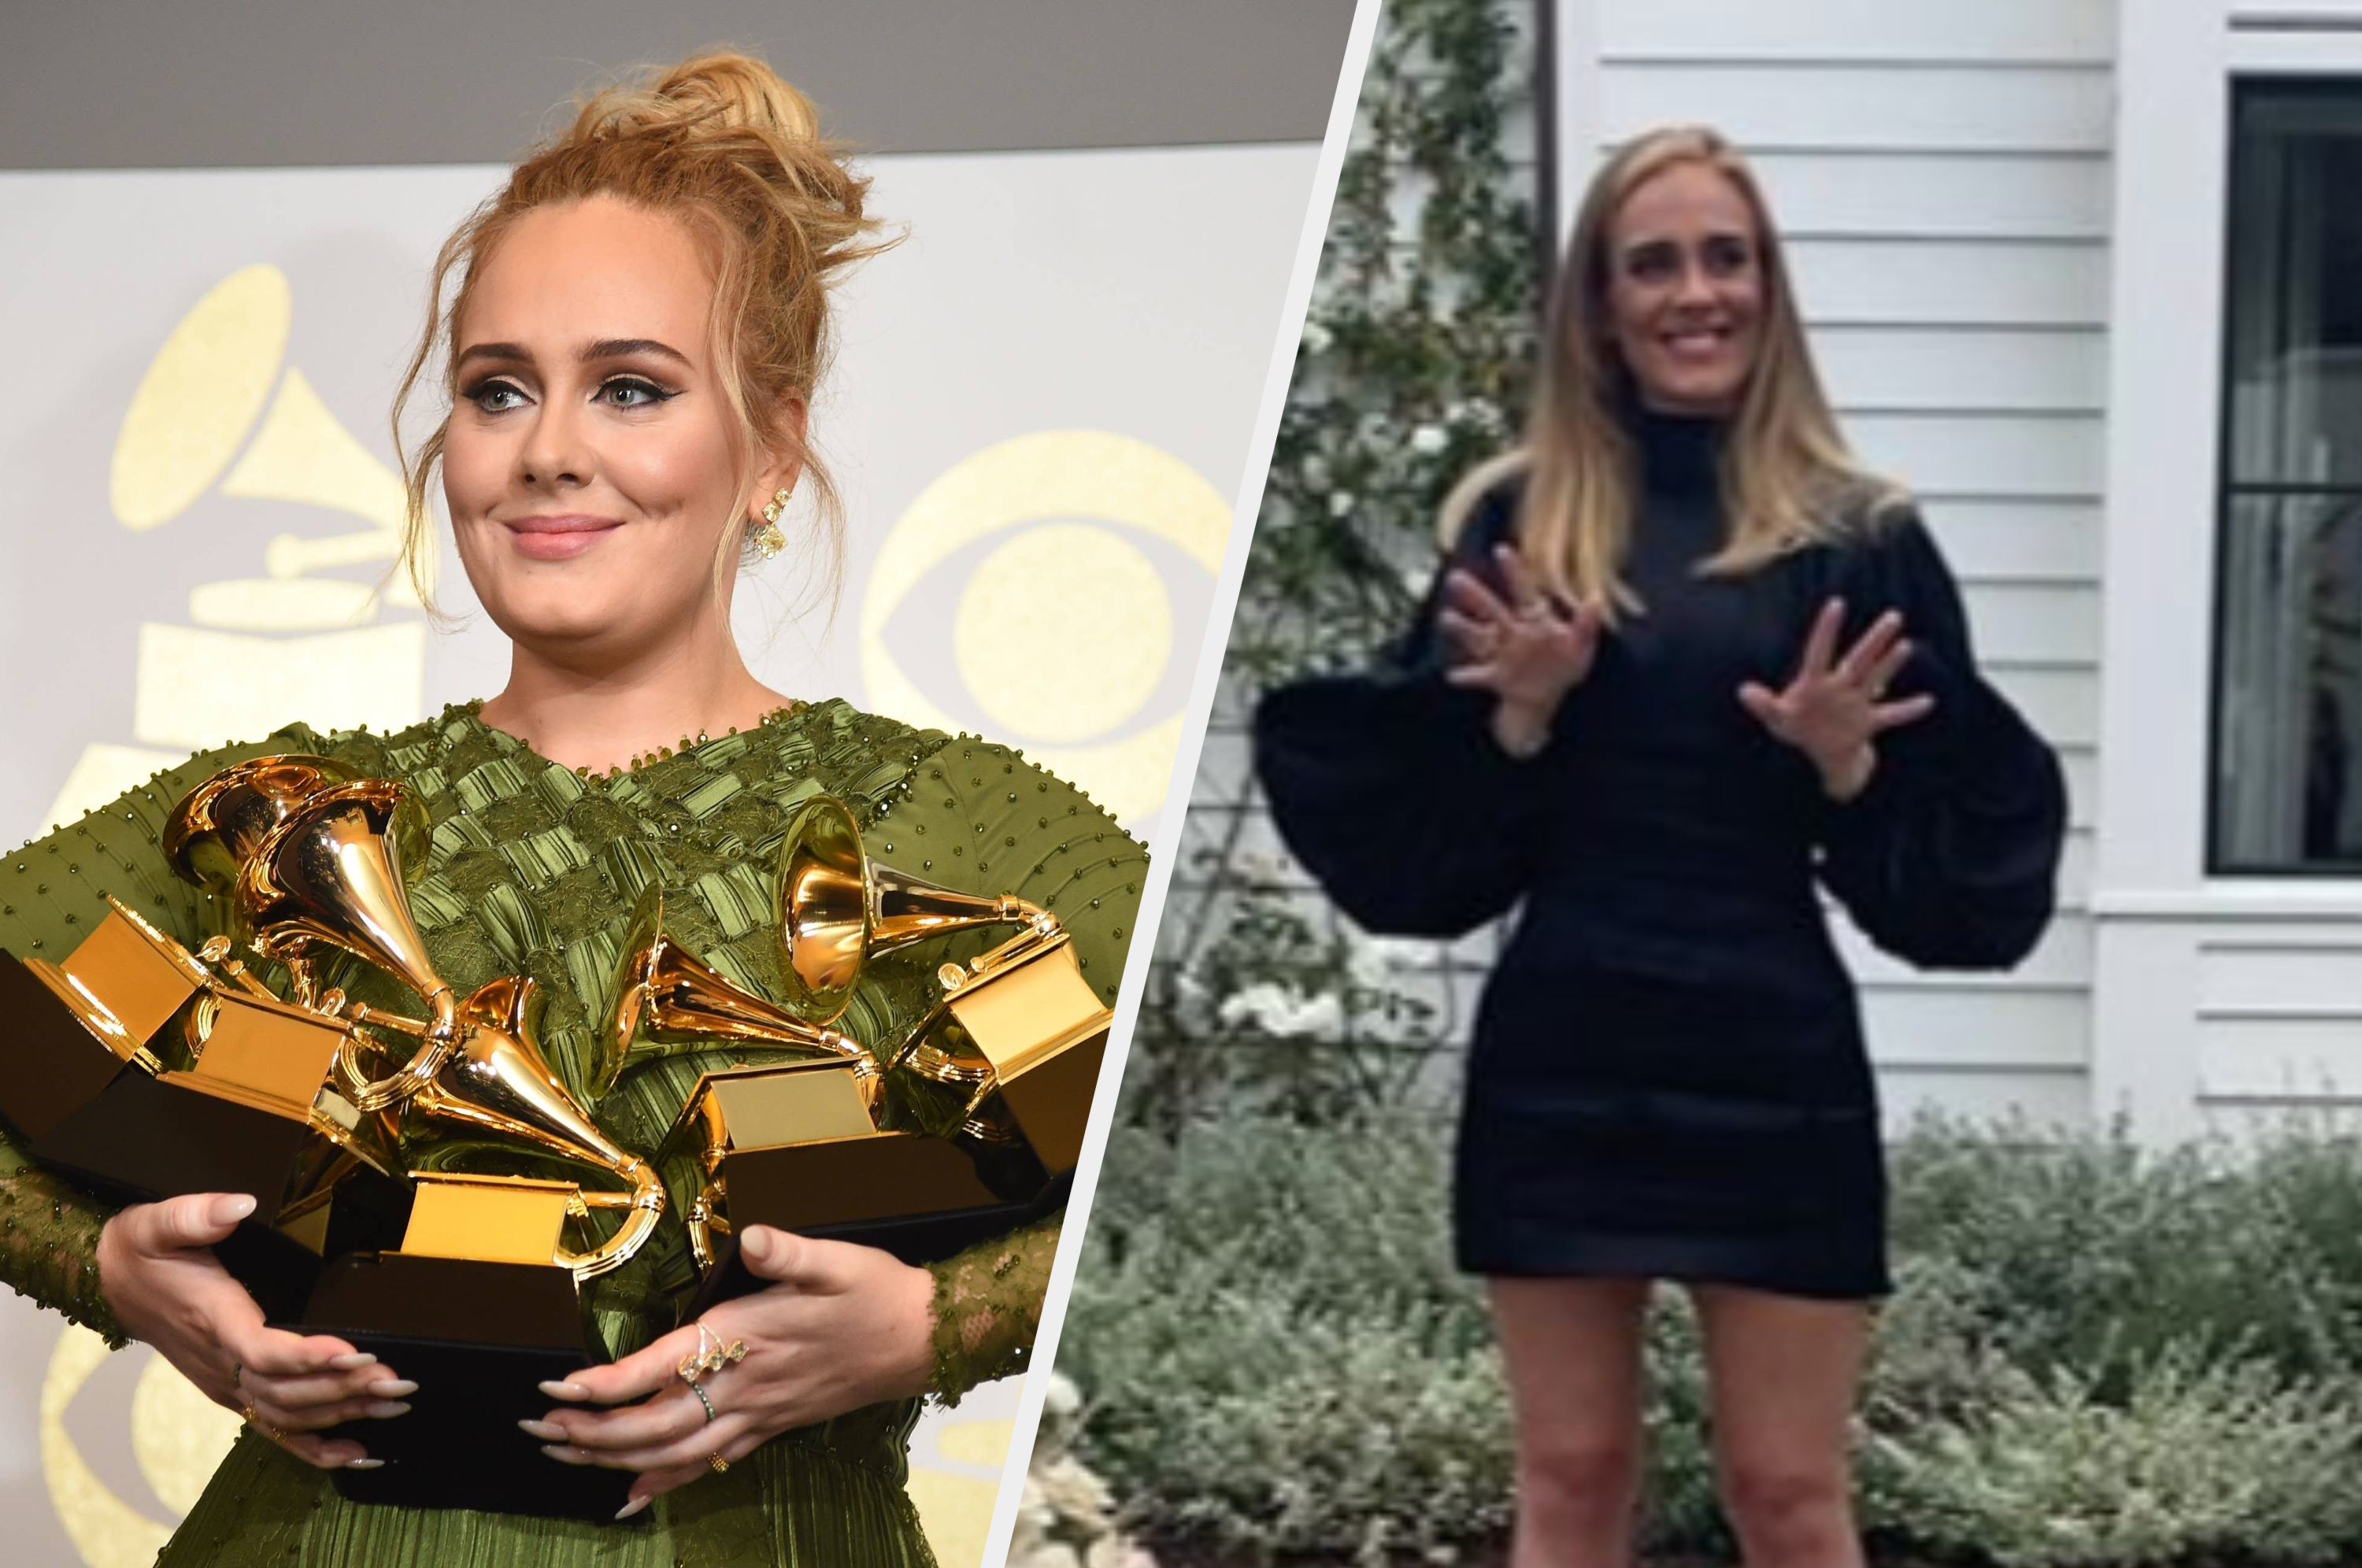 Why Adele's weight loss should be her business only